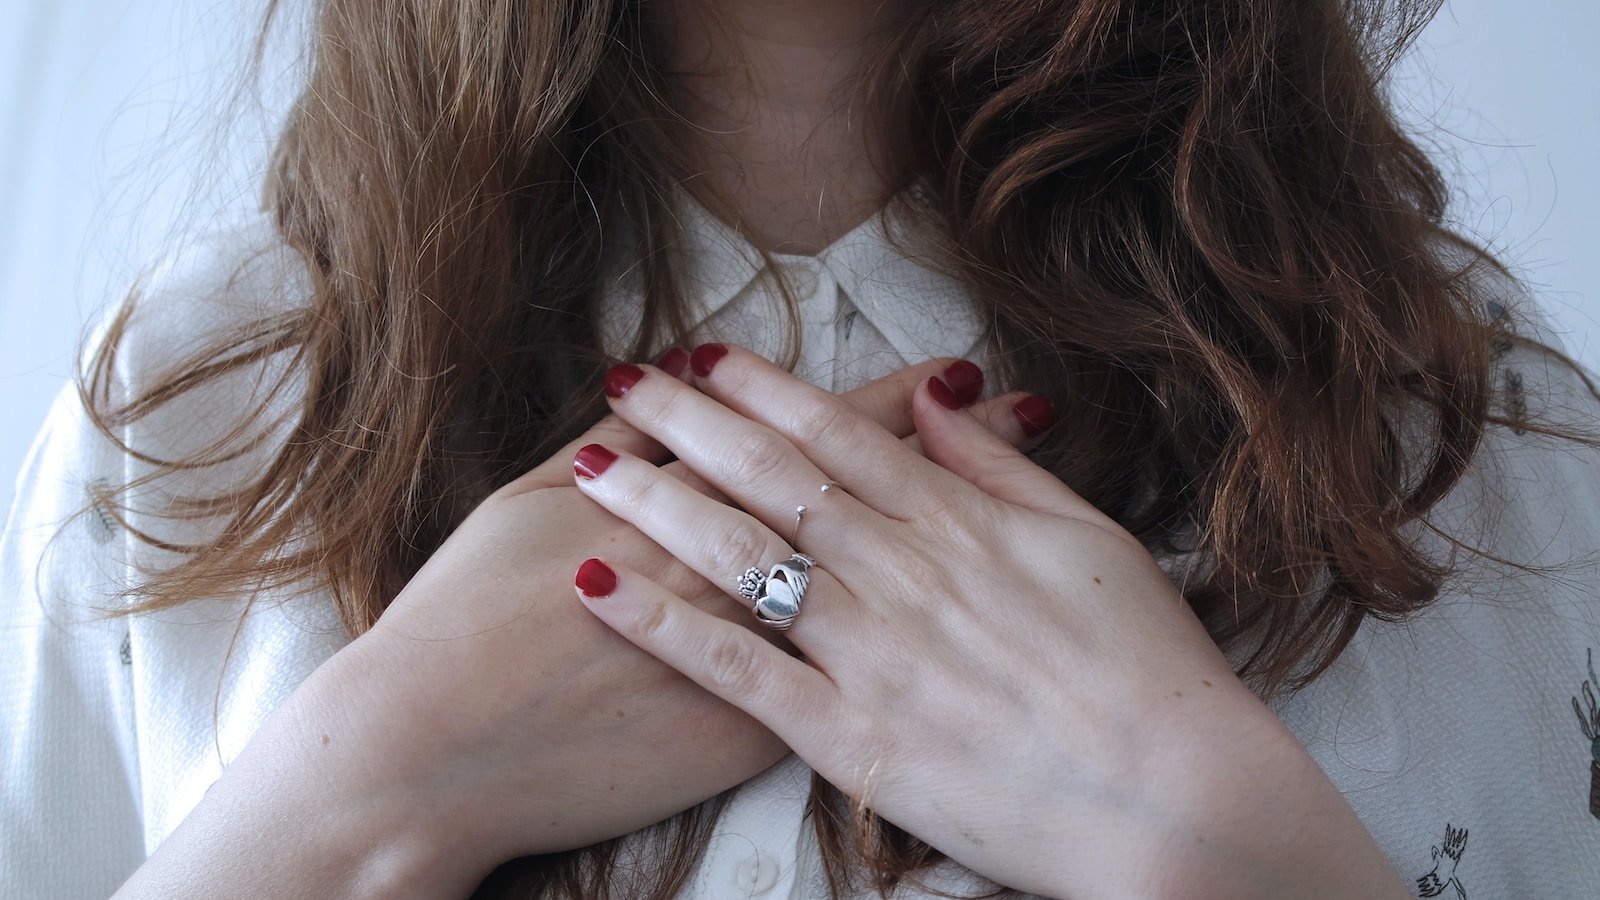 woman wearing silver-colored ring, self-determination theory